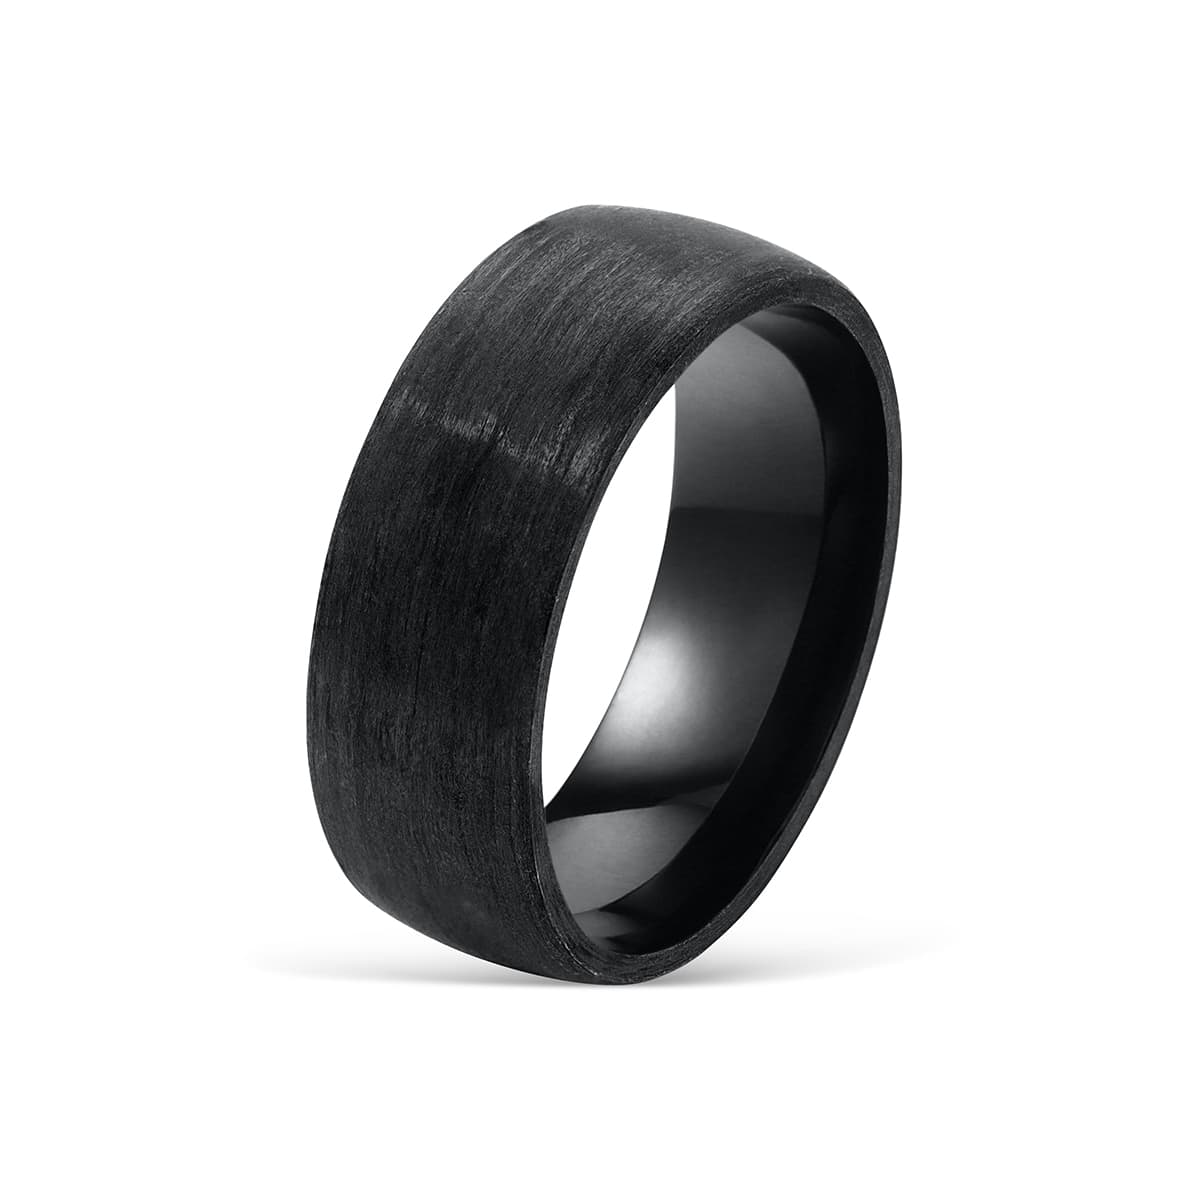 Jewelry European And American Popular Men'S Stainless Steel Ring Wedding  Rings Men'S Clic And Durable Suitable For Daily Use - Walmart.com